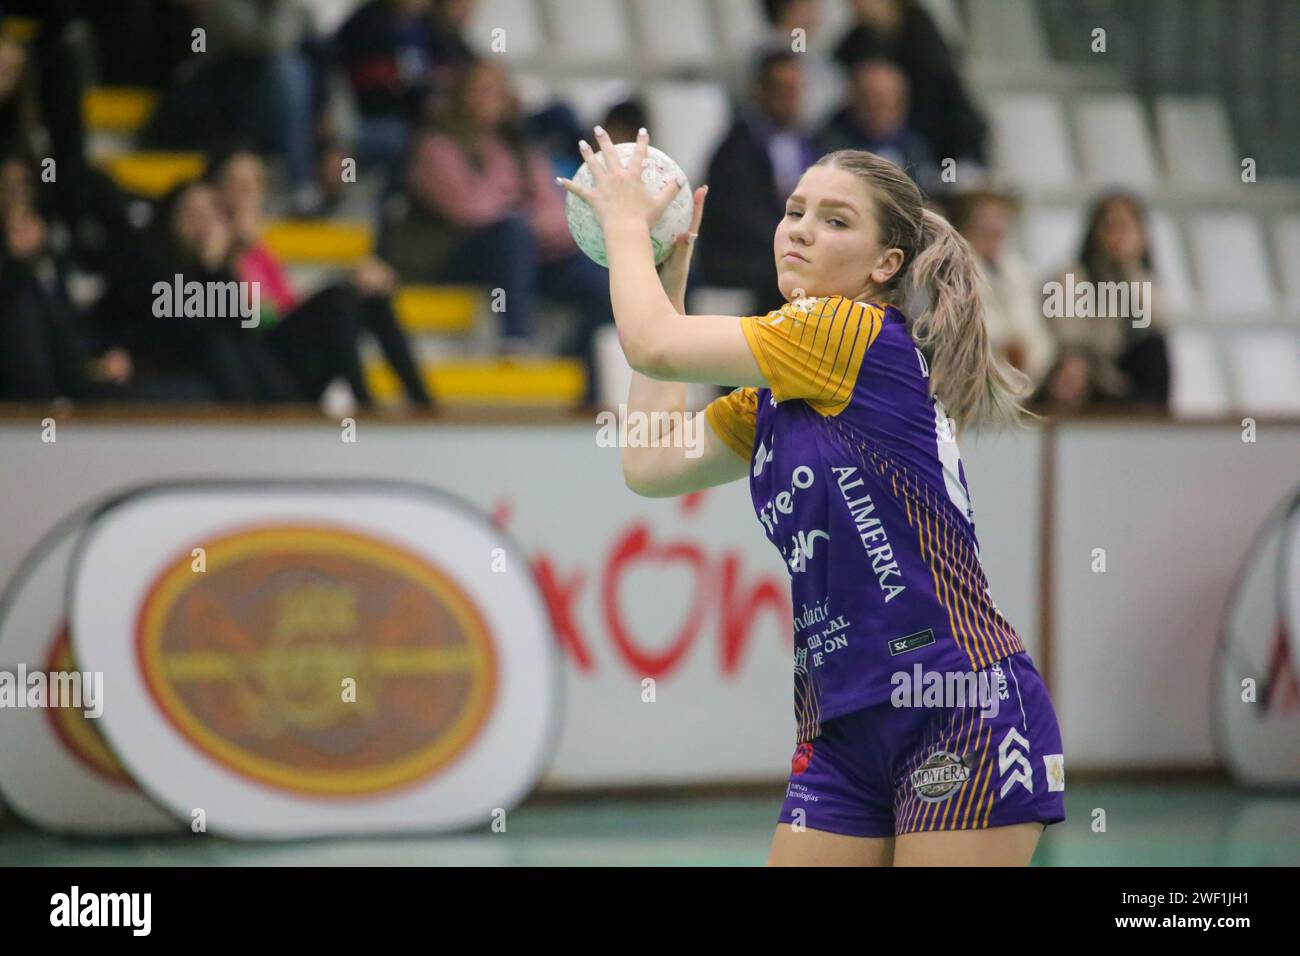 Gijón, Spain. 27th Jan, 2024. The player of Motive.co Gijón Balonmano La Calzada, Dorottya Margit Zentai (66) with the ball during the 15th Matchday of the Liga Guerreras Iberdrola 2023-24 between Motive.co Gijón Balonmano La Calzada and Conserbas Orbe Rubensa BM. Porriño, on January 27, 2024, at the Arena Pavilion, in Gijón, Spain. (Photo by Alberto Brevers/Pacific Press) Credit: Pacific Press Media Production Corp./Alamy Live News Stock Photo